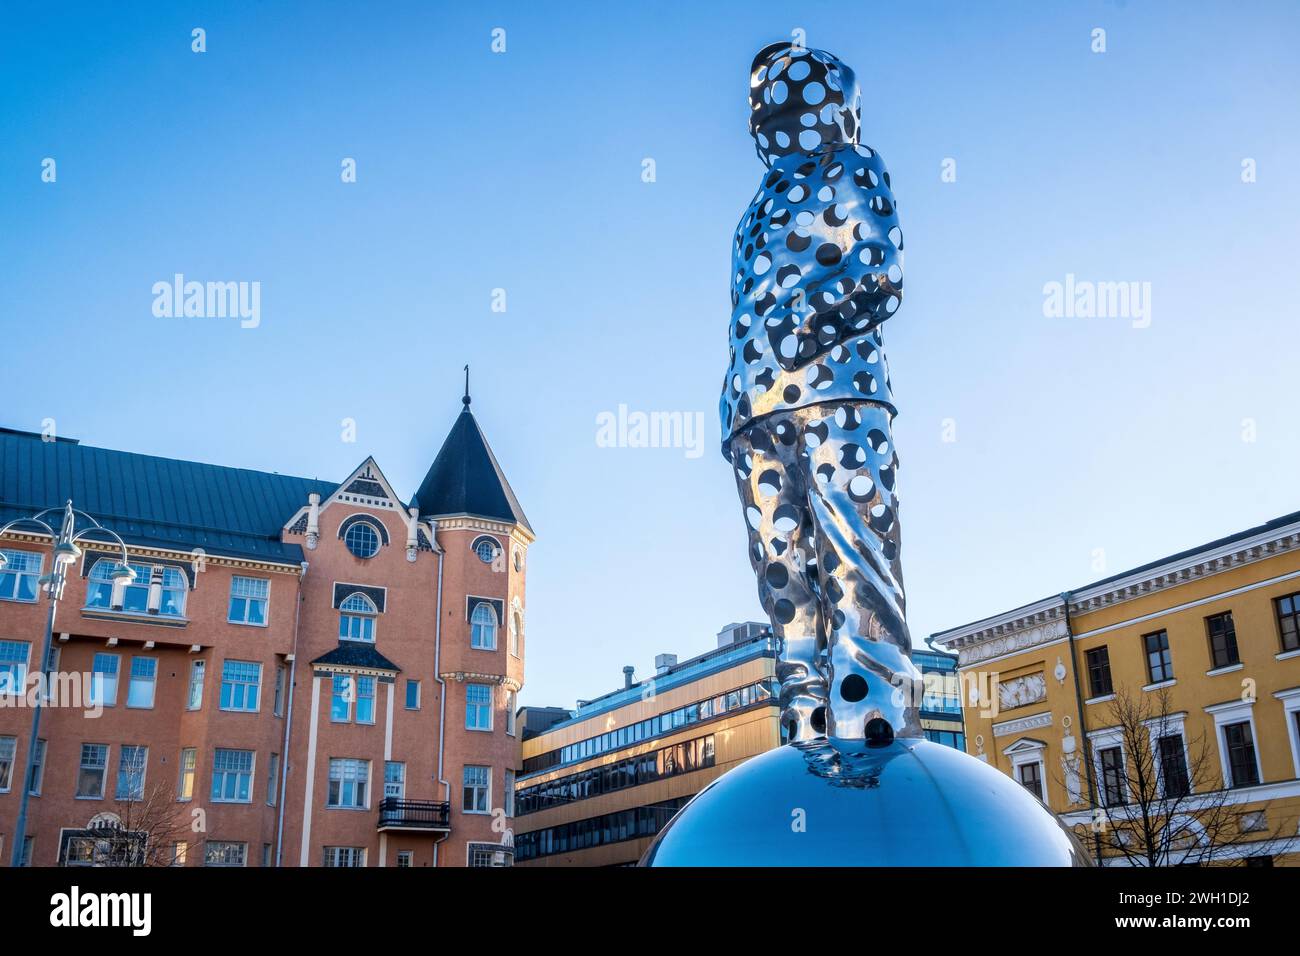 National Memorial to the Winter War (unveiled in 2017), Helsinki, Finland Stock Photo